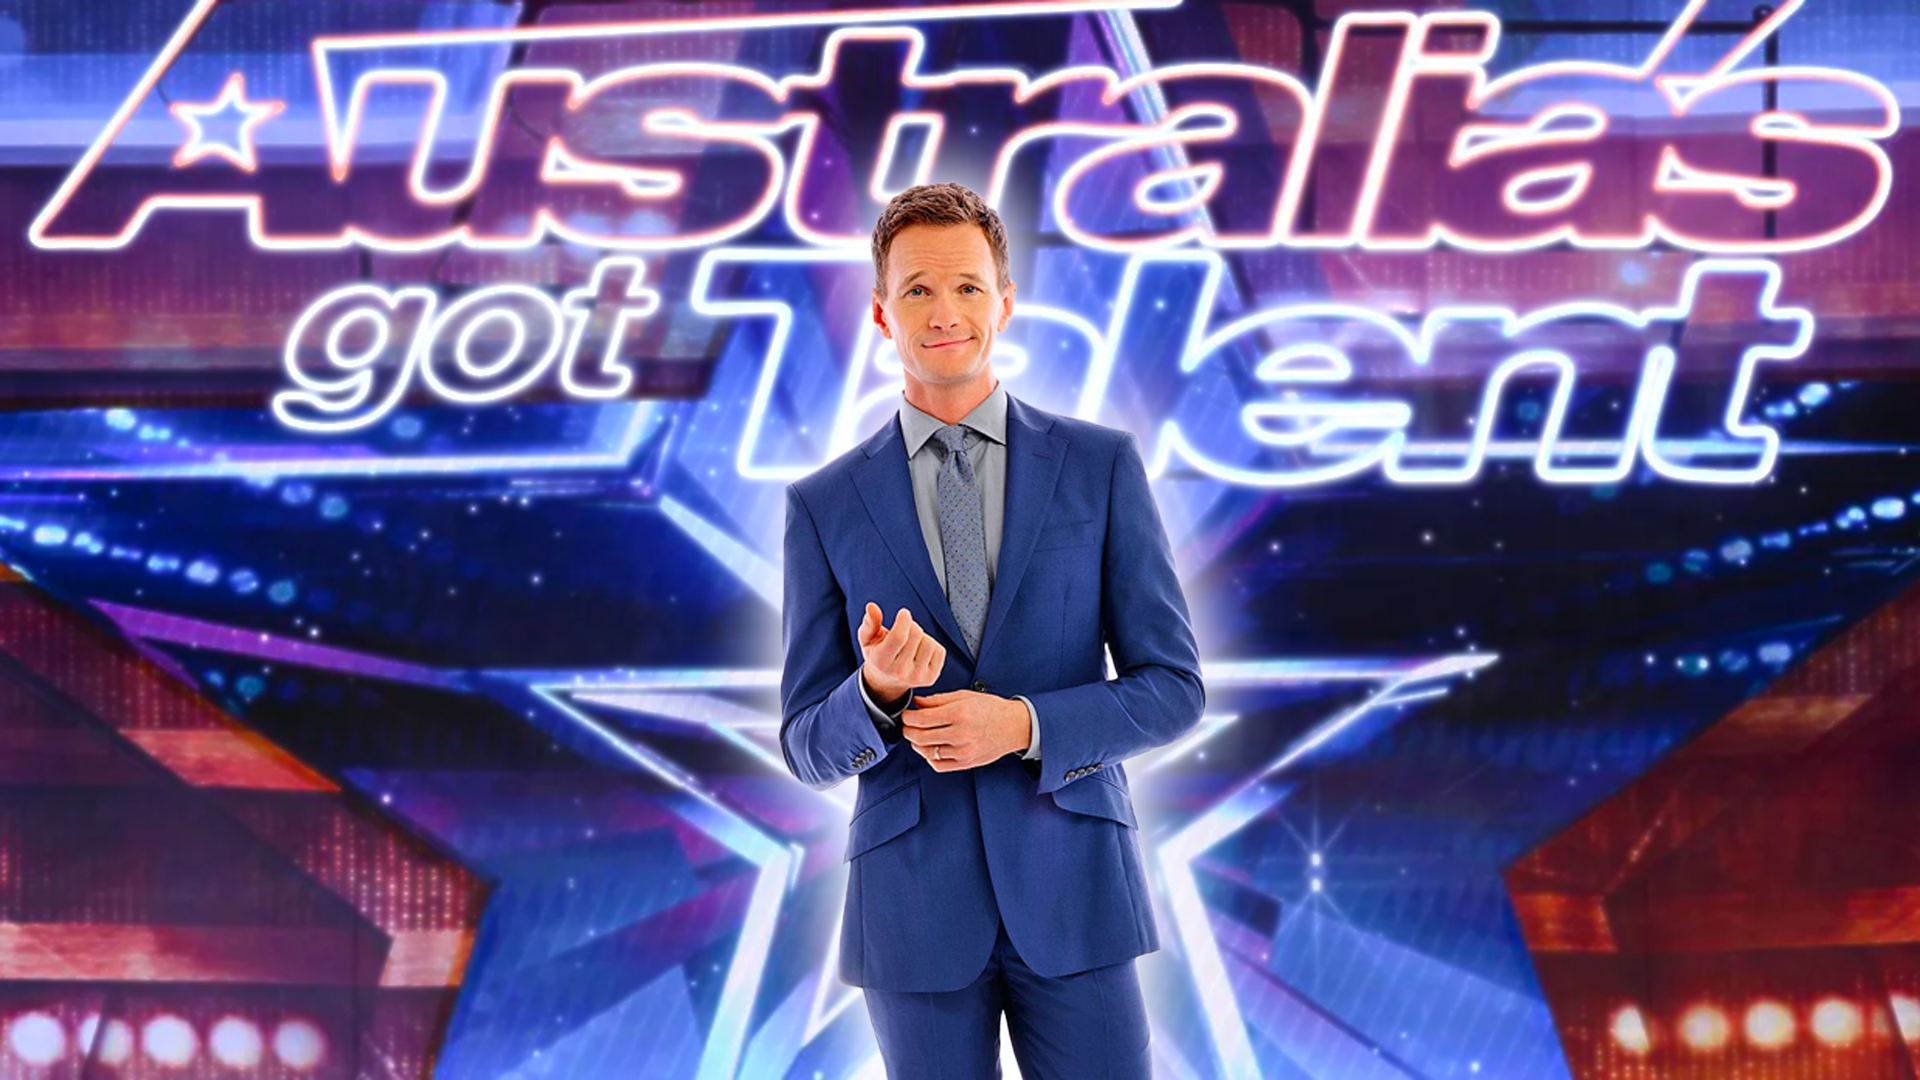 Neil Patrick Harris Is Joining Australia’s Got Talent, So Expect The